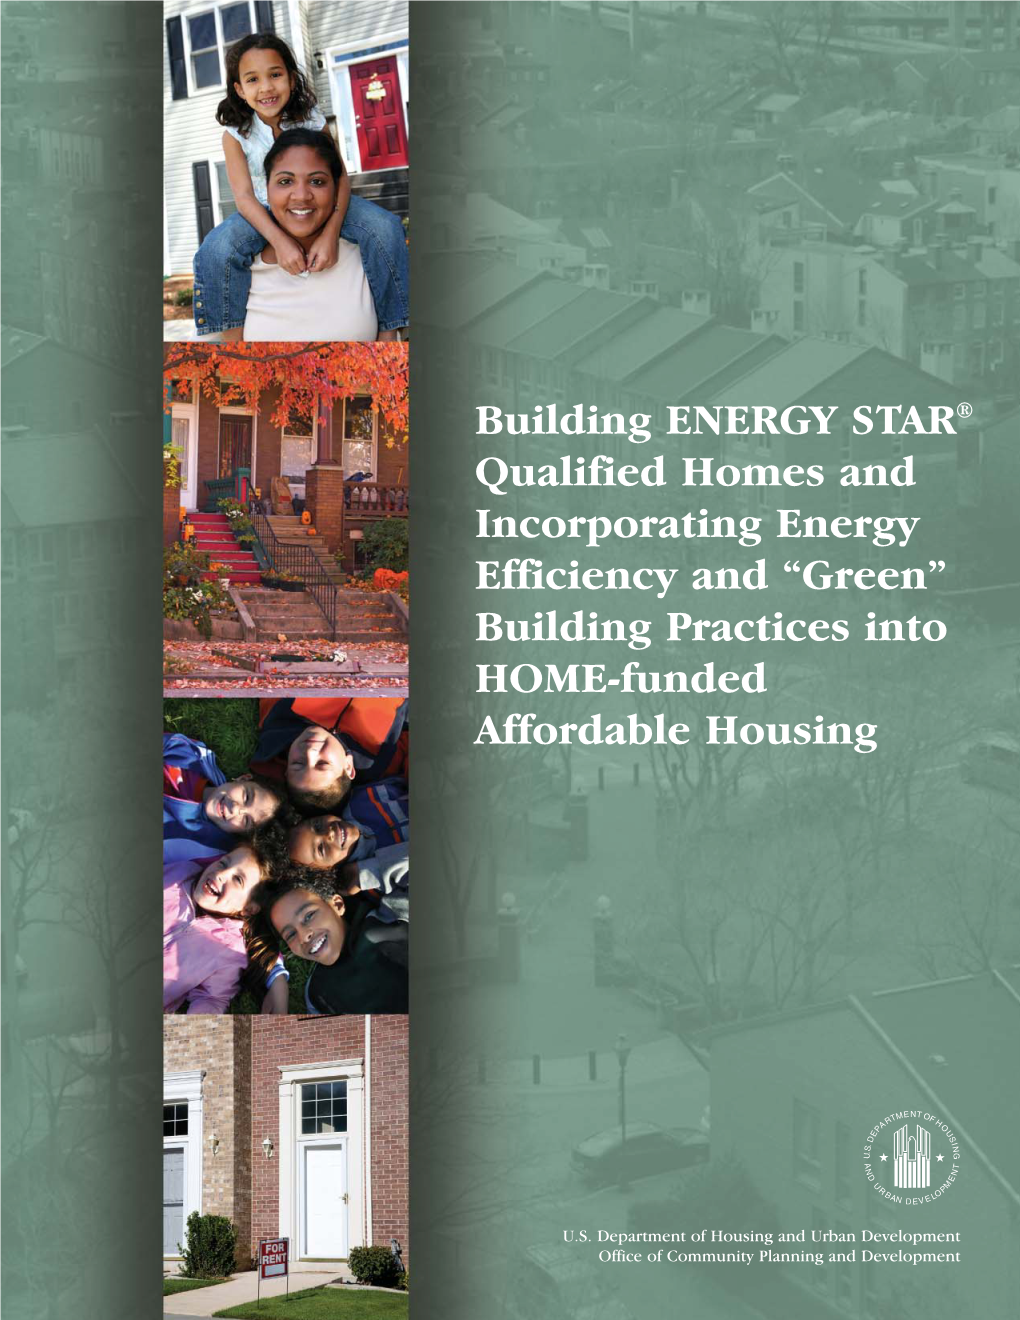 Building ENERGY STAR® Qualified Homes and Incorporating Energy Efficiency and “Green” Building Practices Into HOME-Funded Affordable Housing